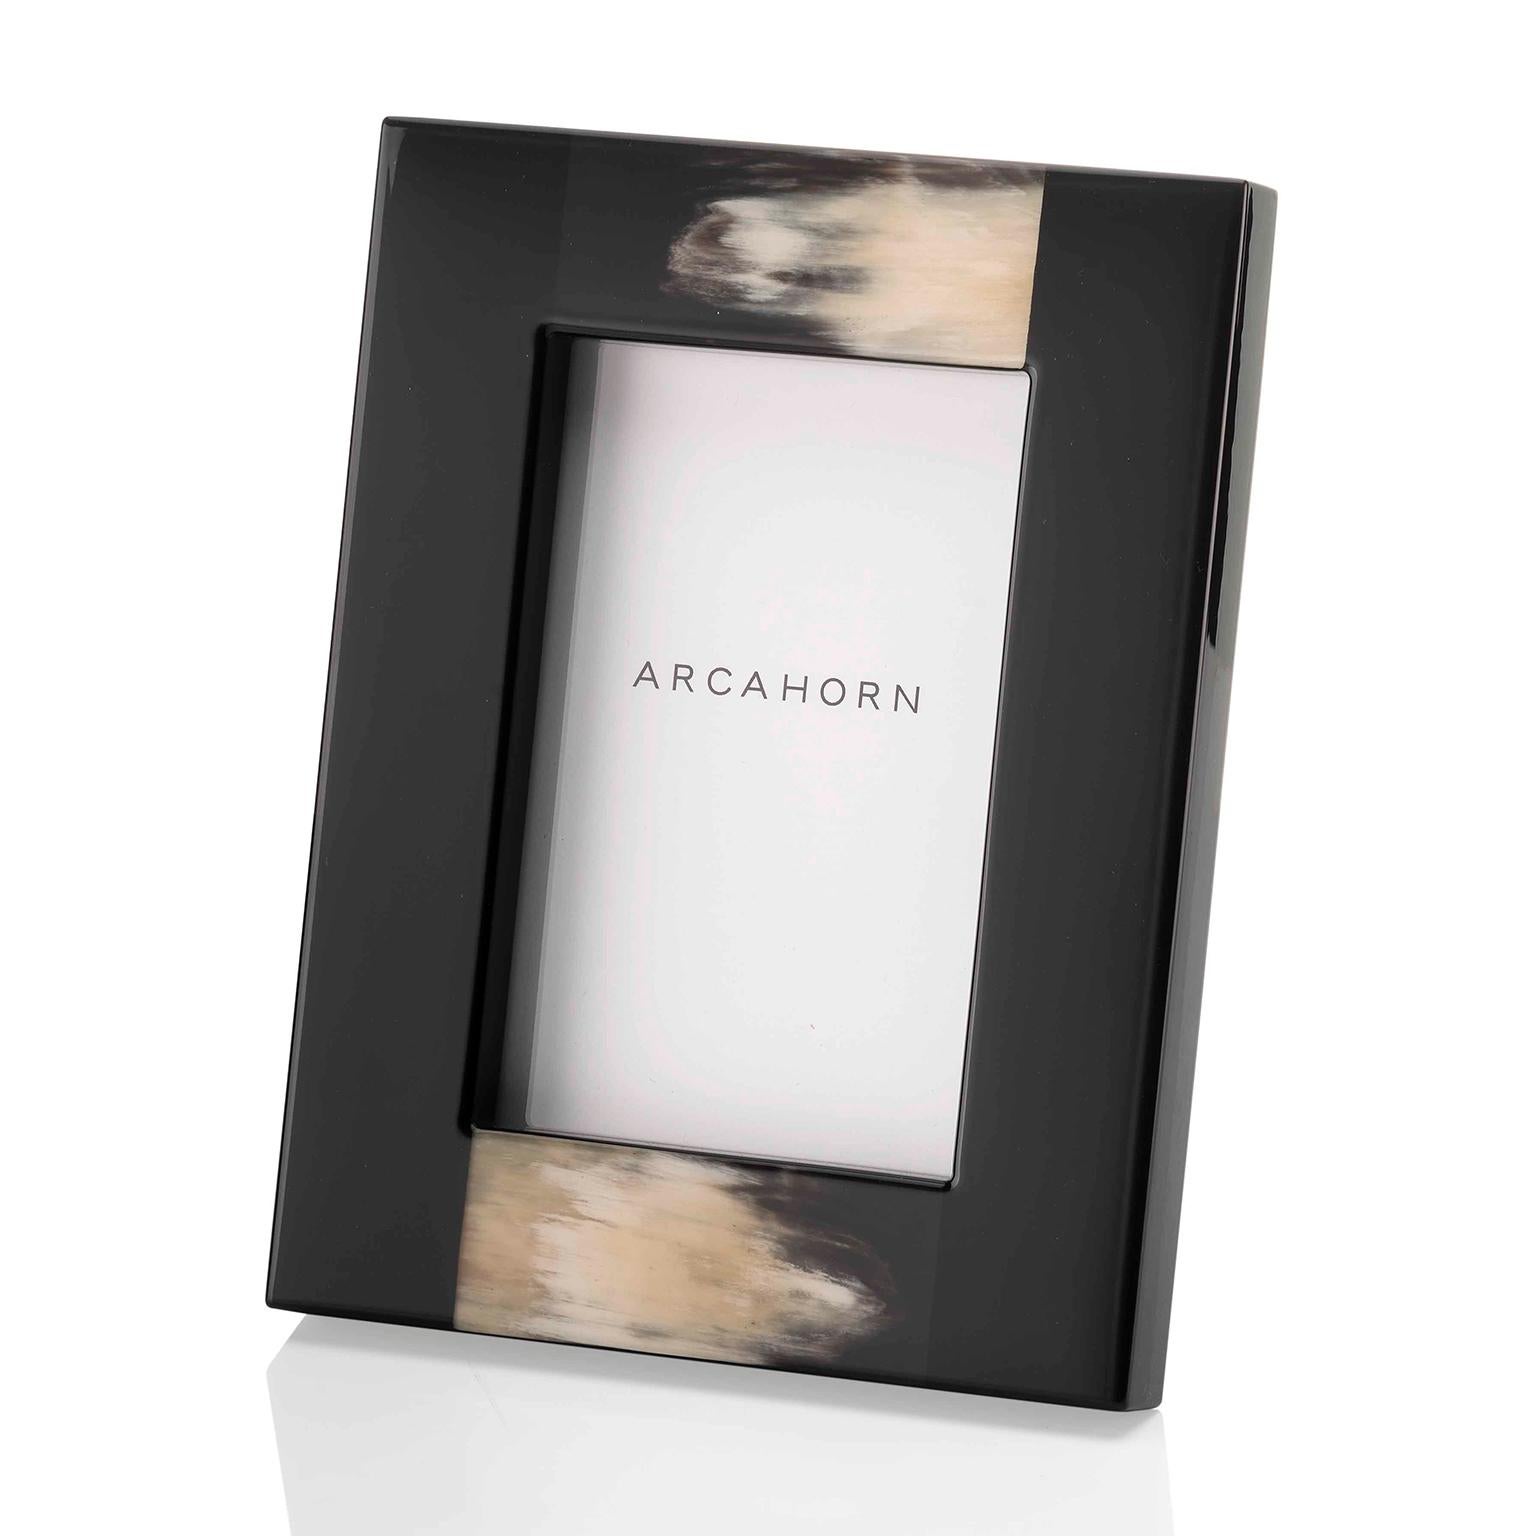 Handcrafted from wood with lacquered black gloss finish, Medea picture frame excels luxury and elegance with its detailing in Corno Italiano, whose remarkable natural nuances will lend a touch of opulence to your home or office décor. Available in